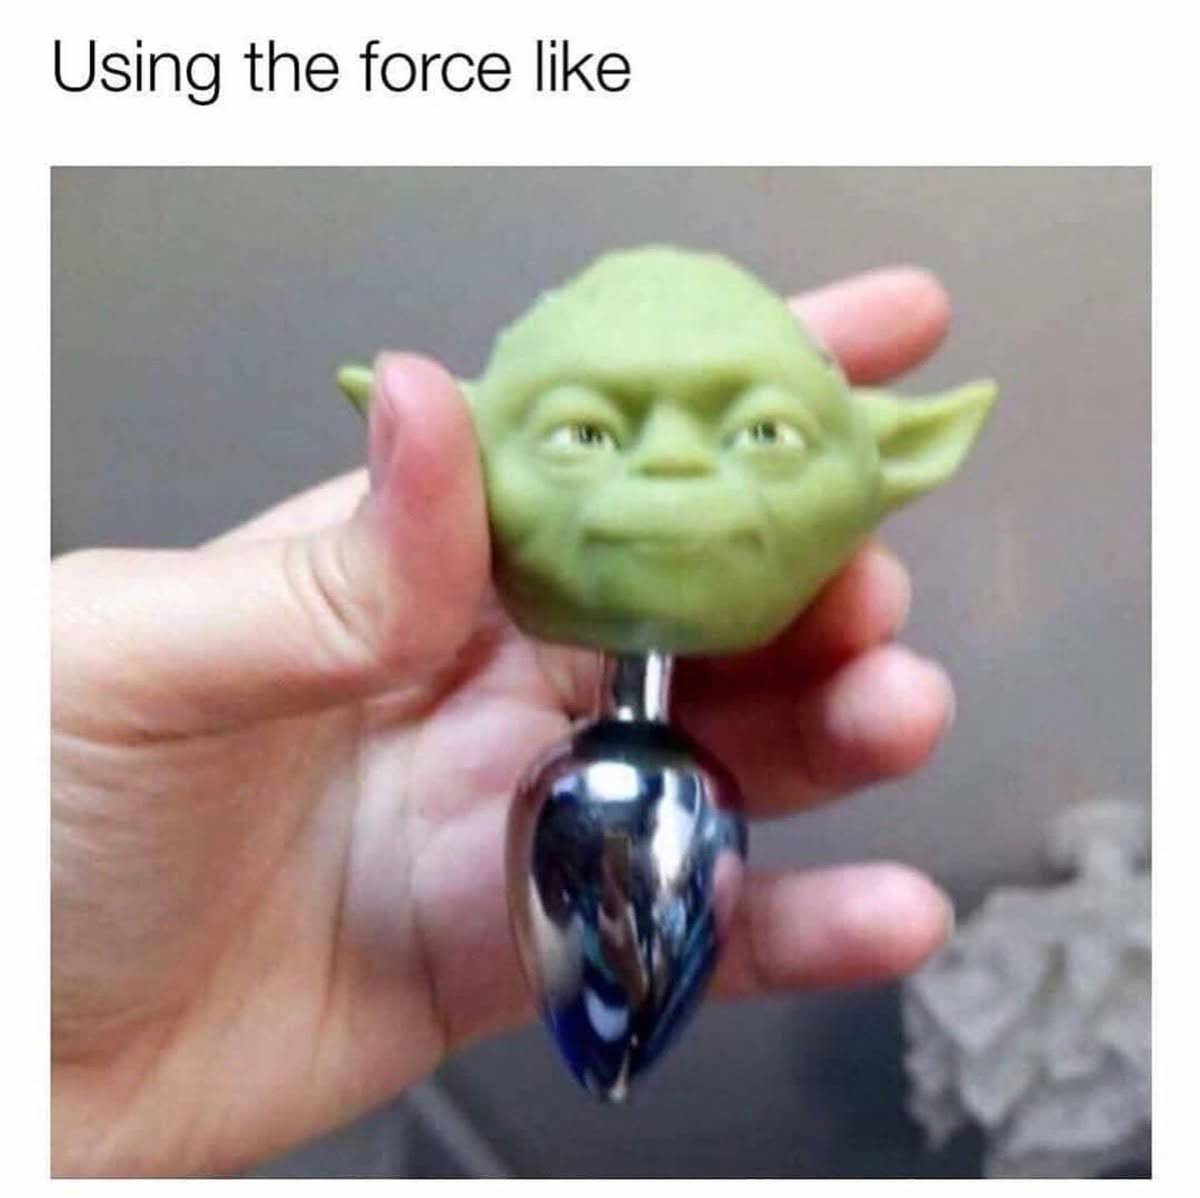 sex-memes - cursed butt plugs - Using the force